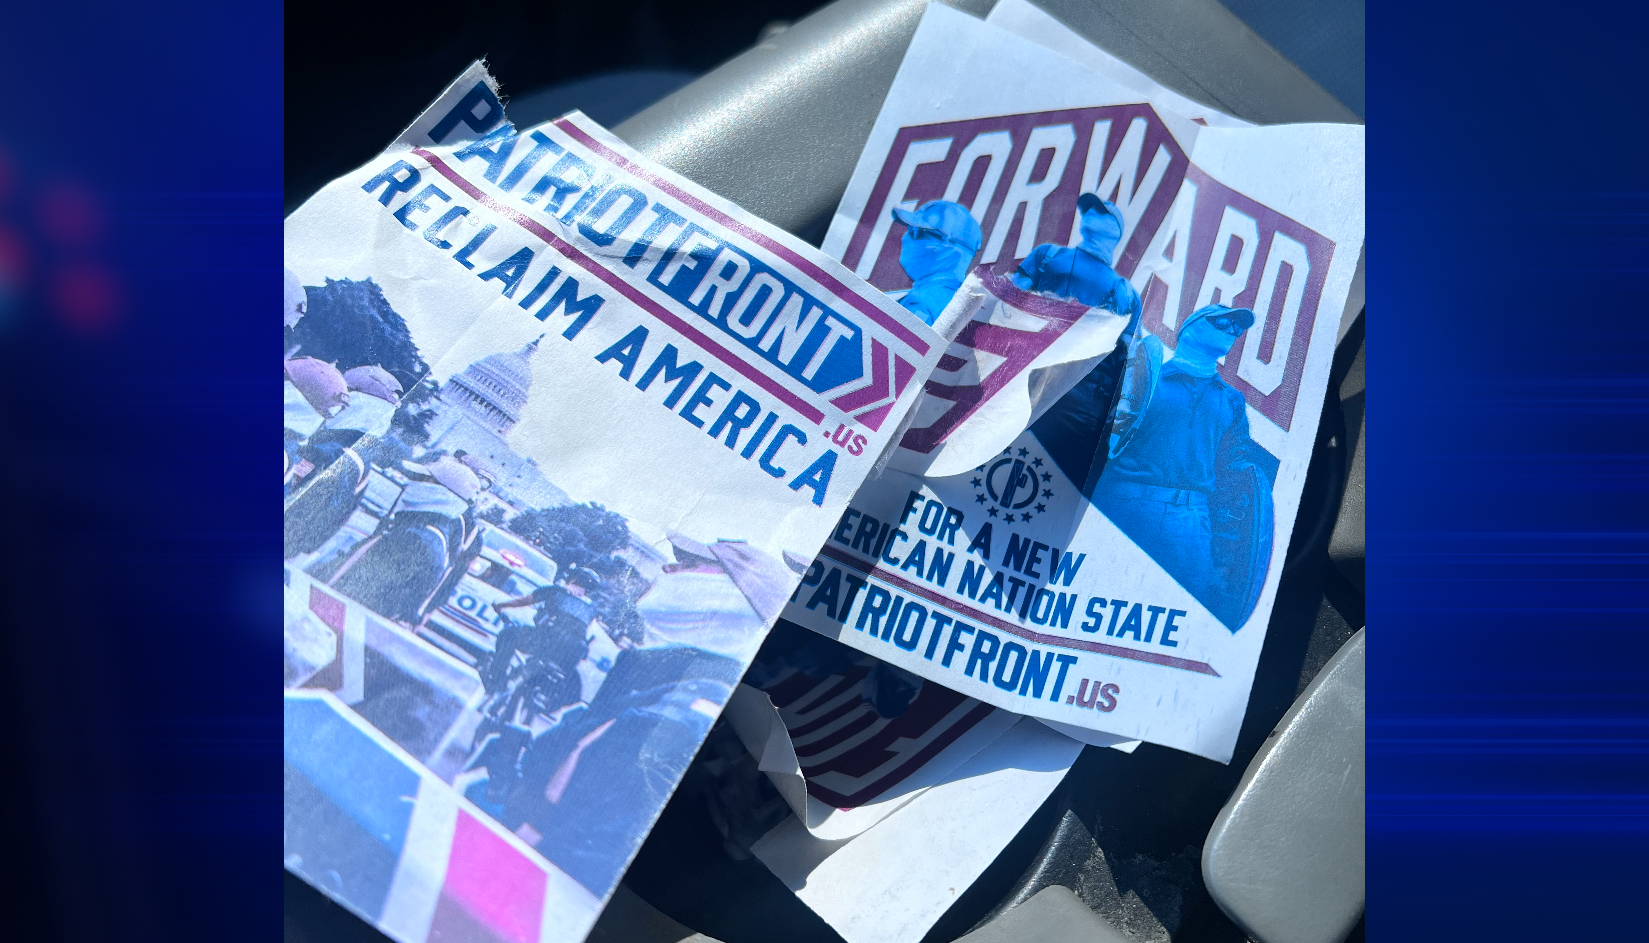 White supremacist anti-government group flyers posted in downtown Wallace [Video]